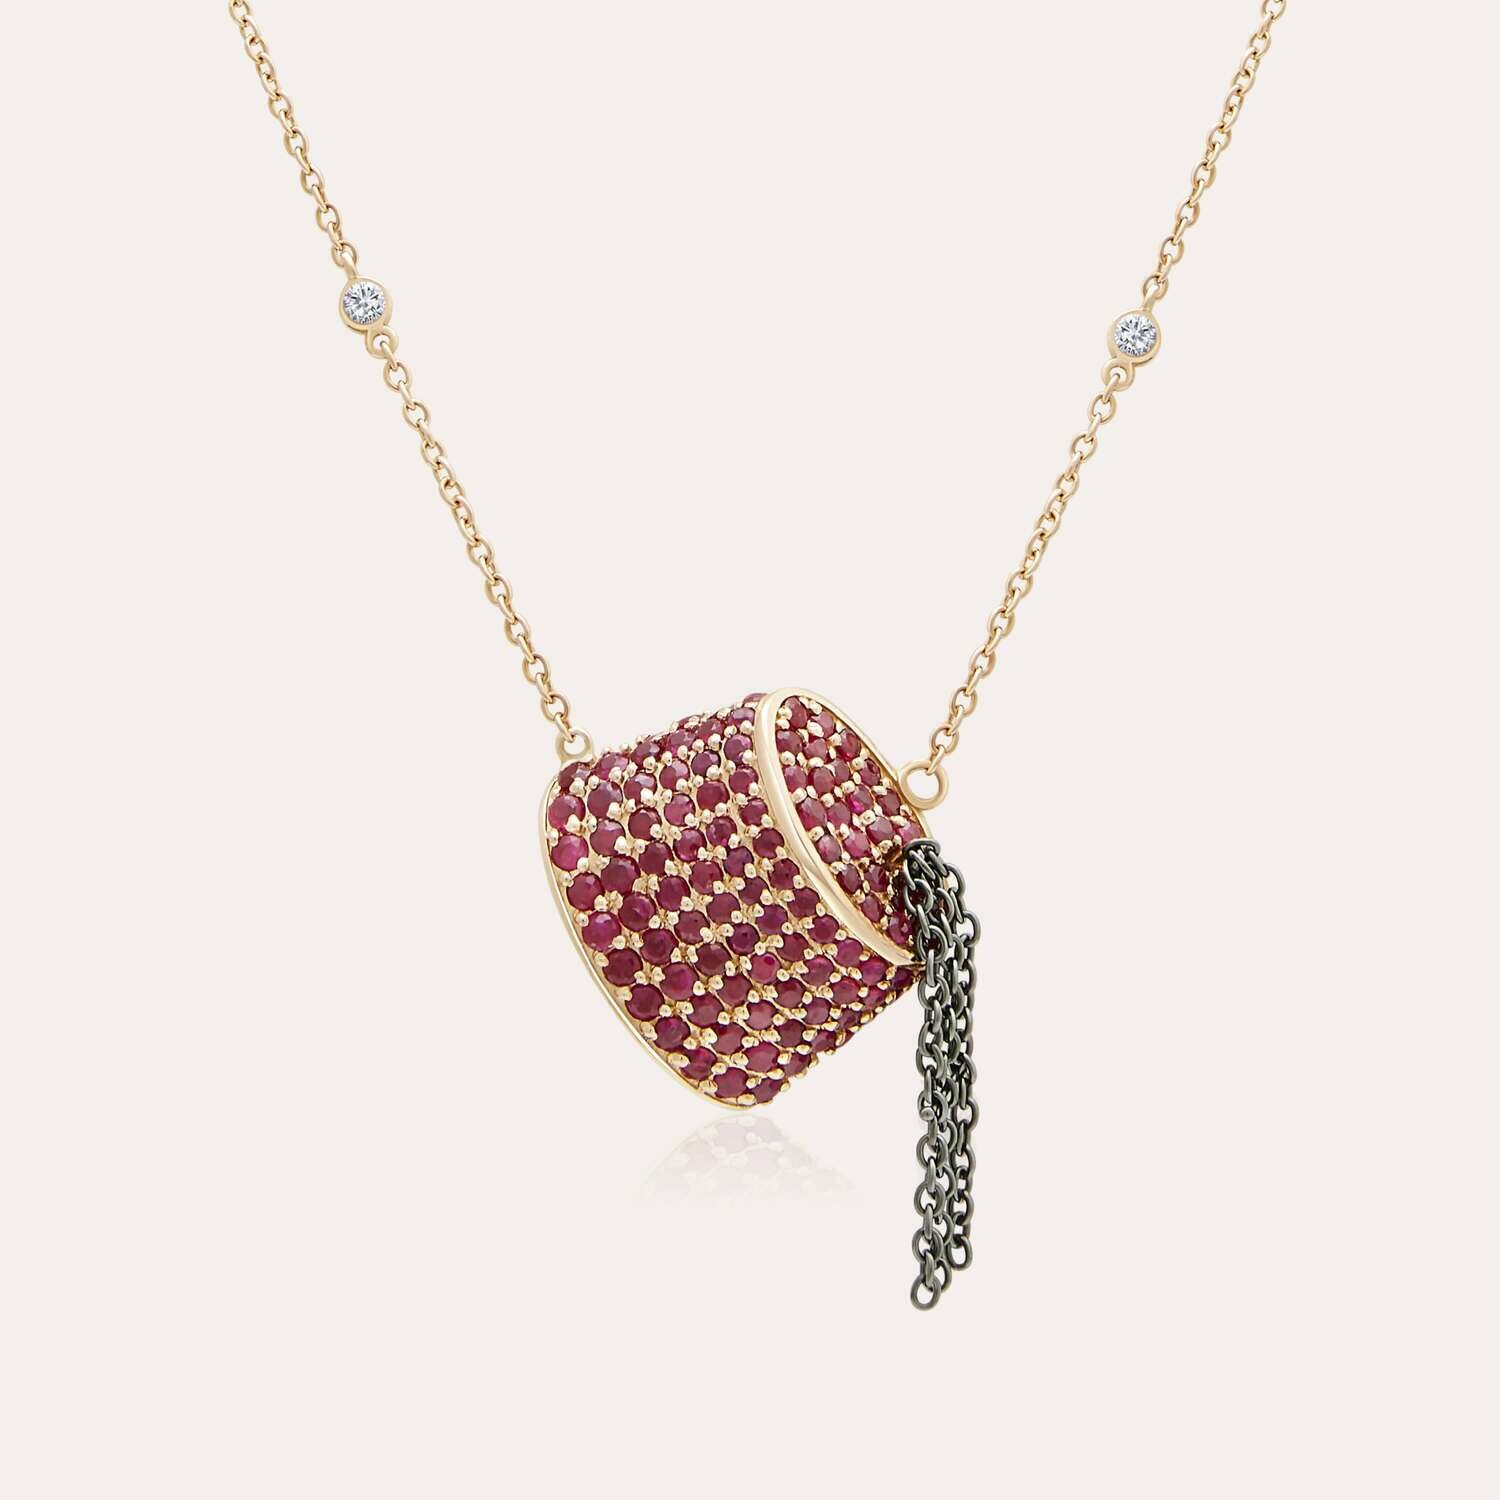 Tarboush Diamond Necklace with Ruby